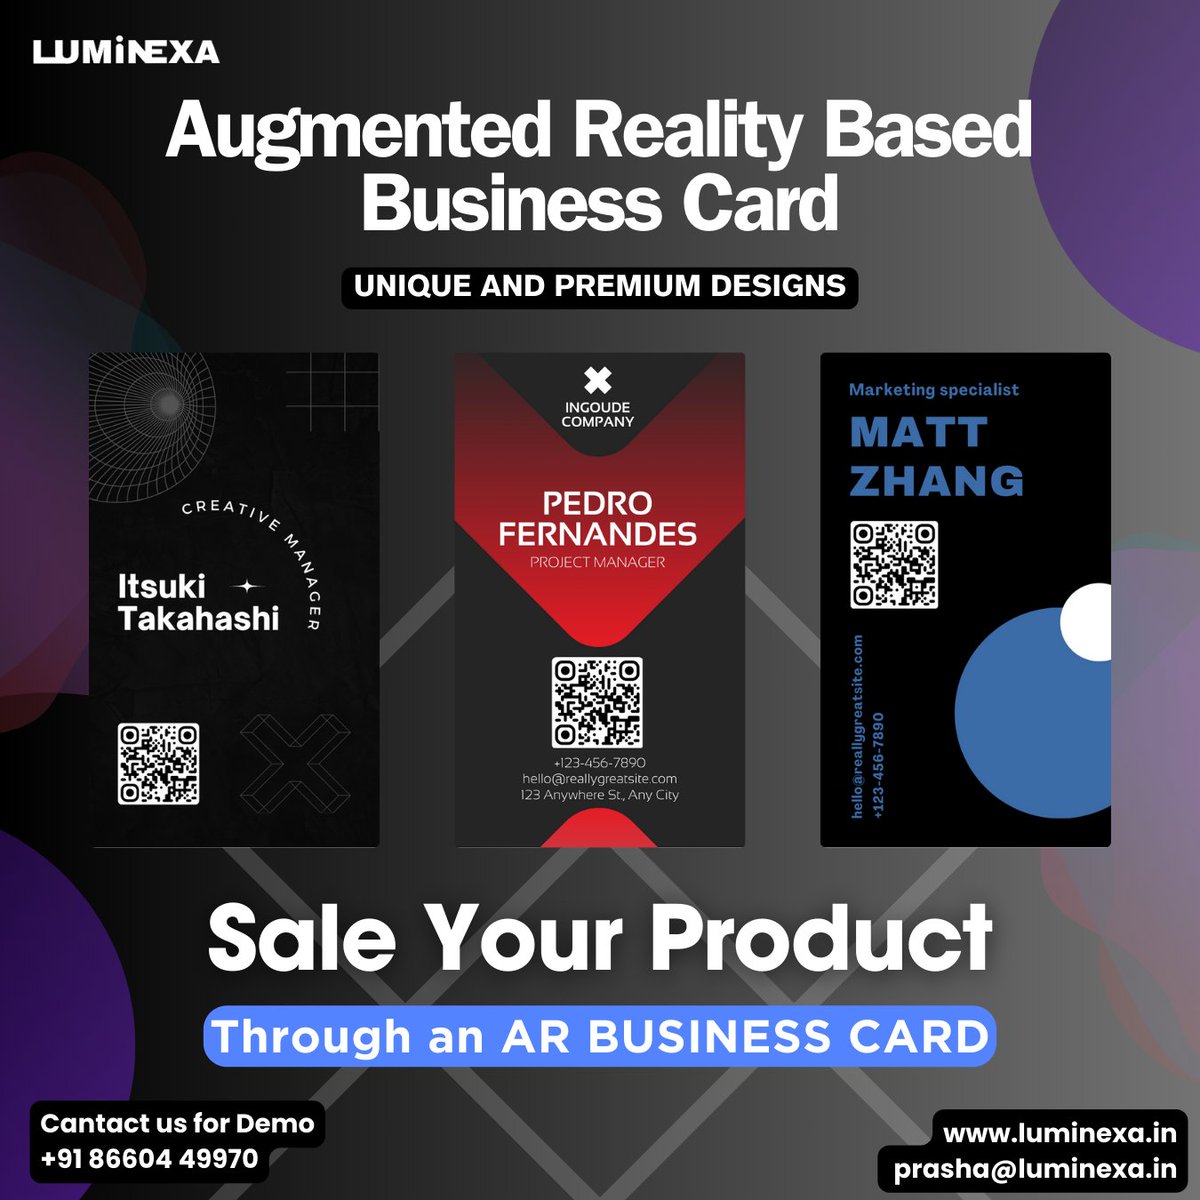 Transform your business cards with augmented reality! 🌟 Showcase your products through immersive videos and provide a seamless buying experience with direct purchase links. 📱 Elevate your networking game and make a lasting impression! #ARBusinessCards #Innovation #TechCommerce